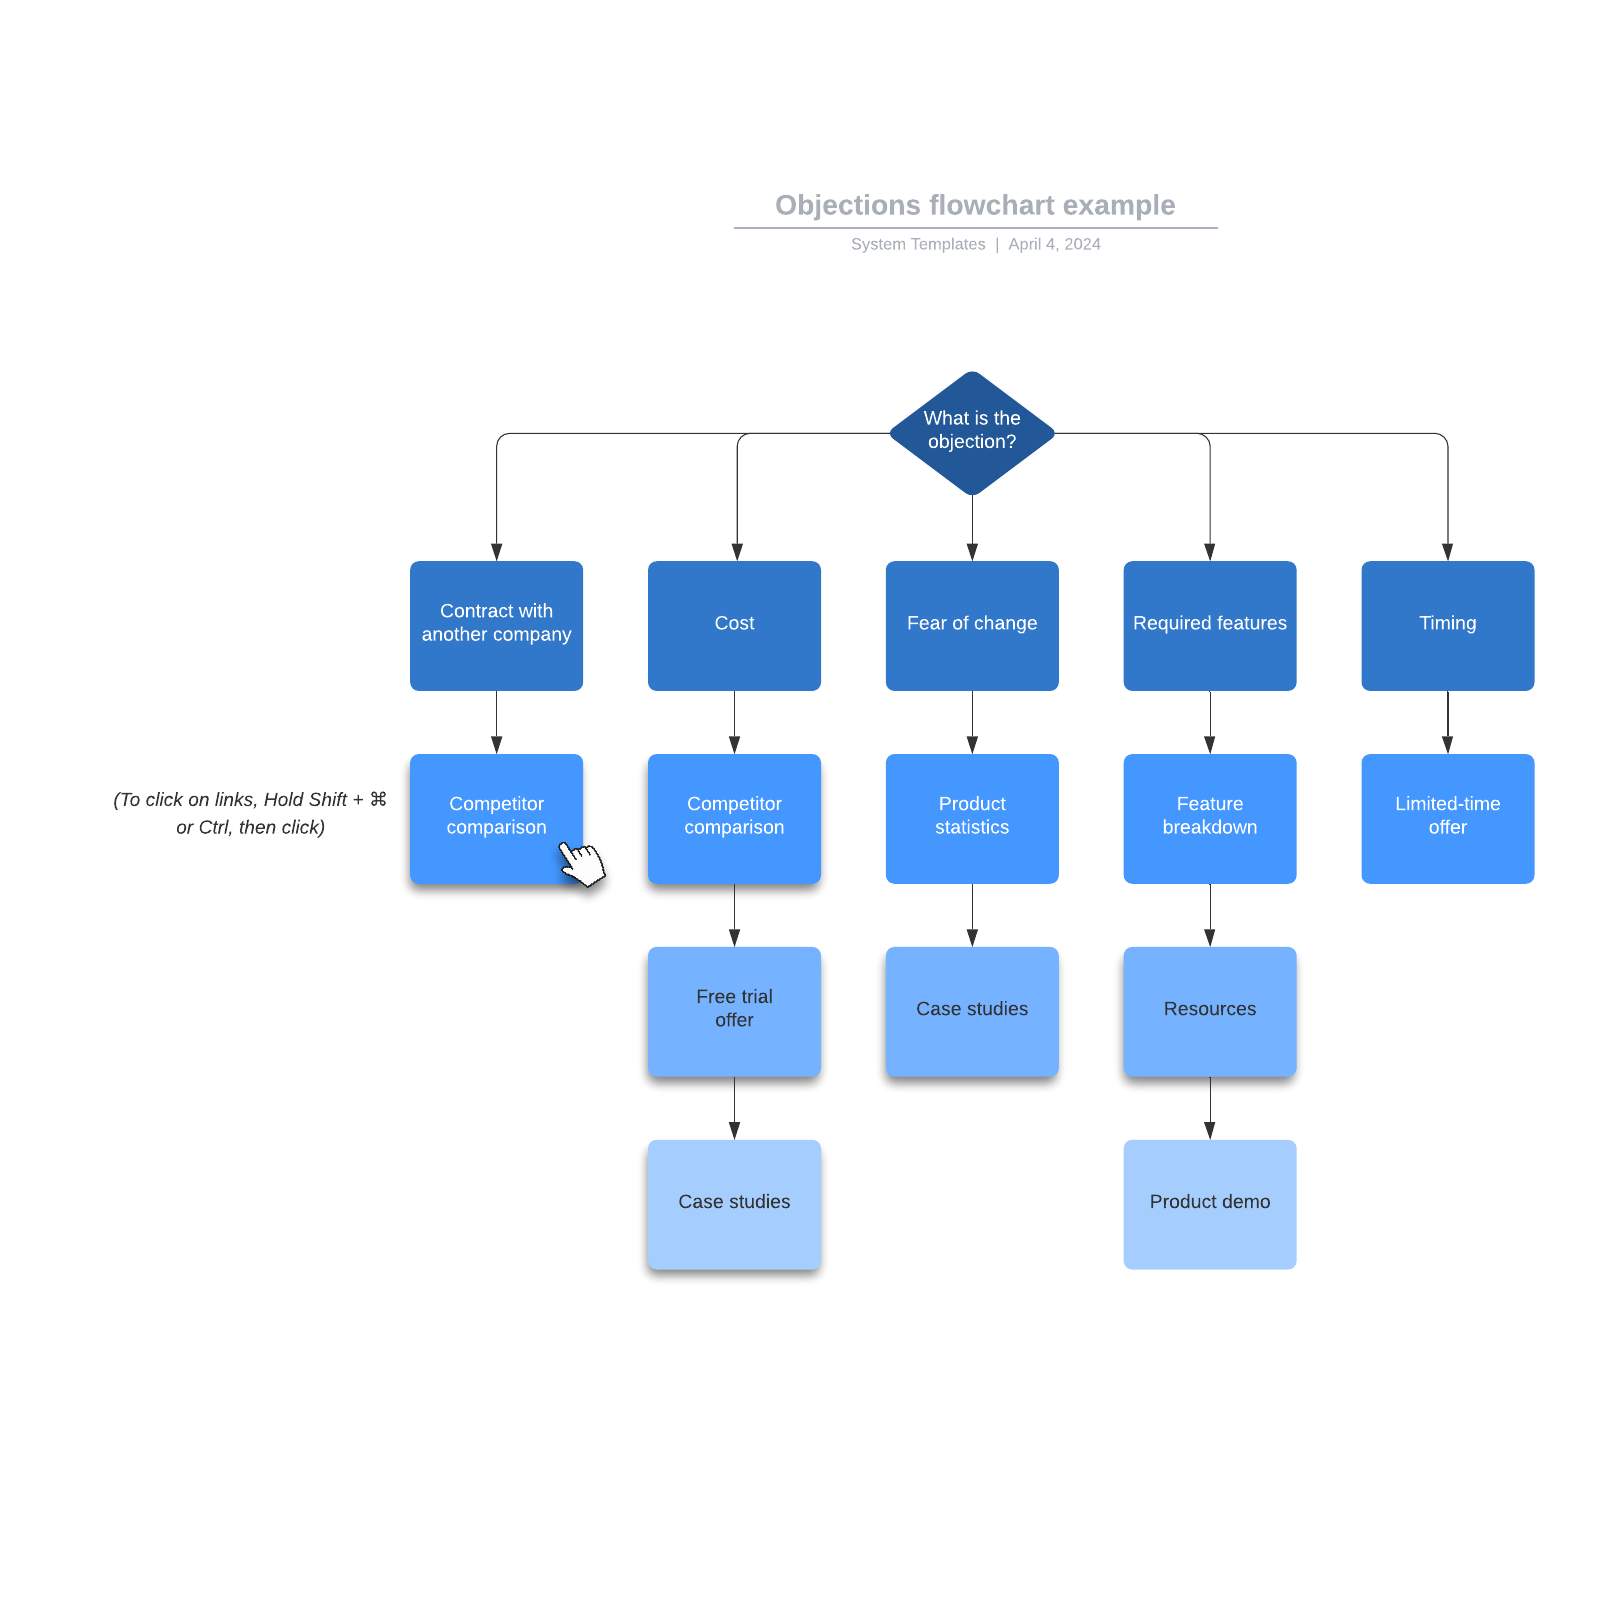 Objections flowchart example example